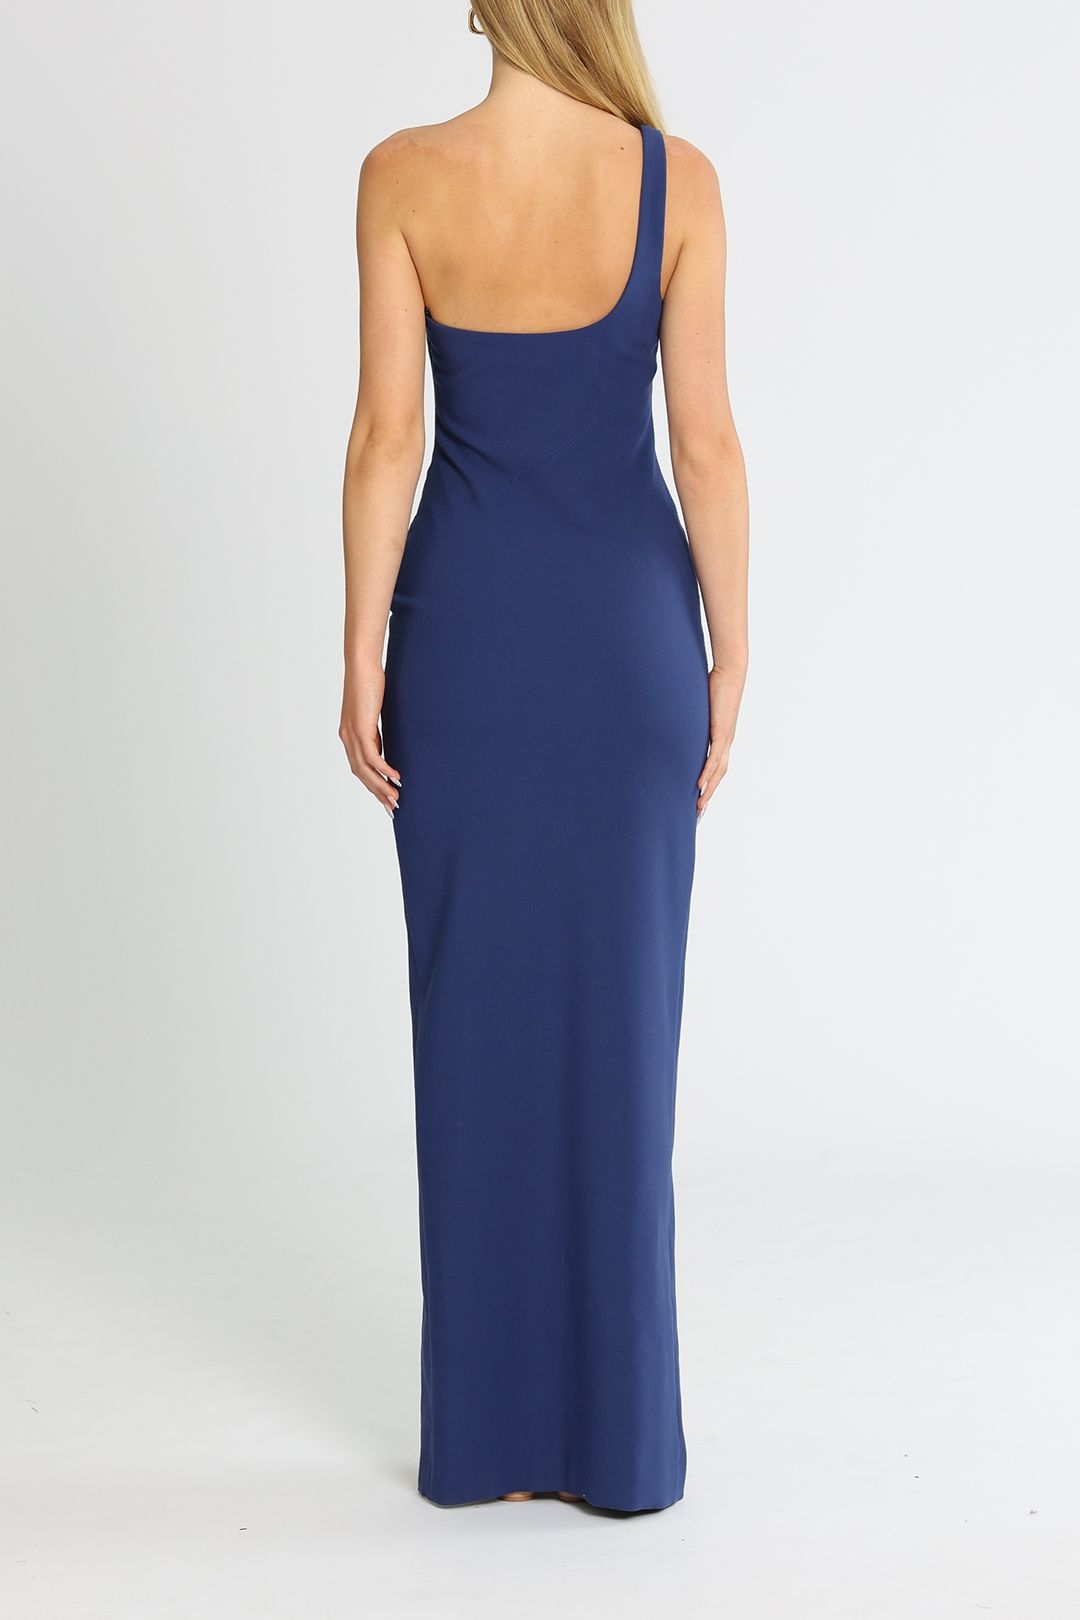 Likely NYC Camden Gown Navy Blue